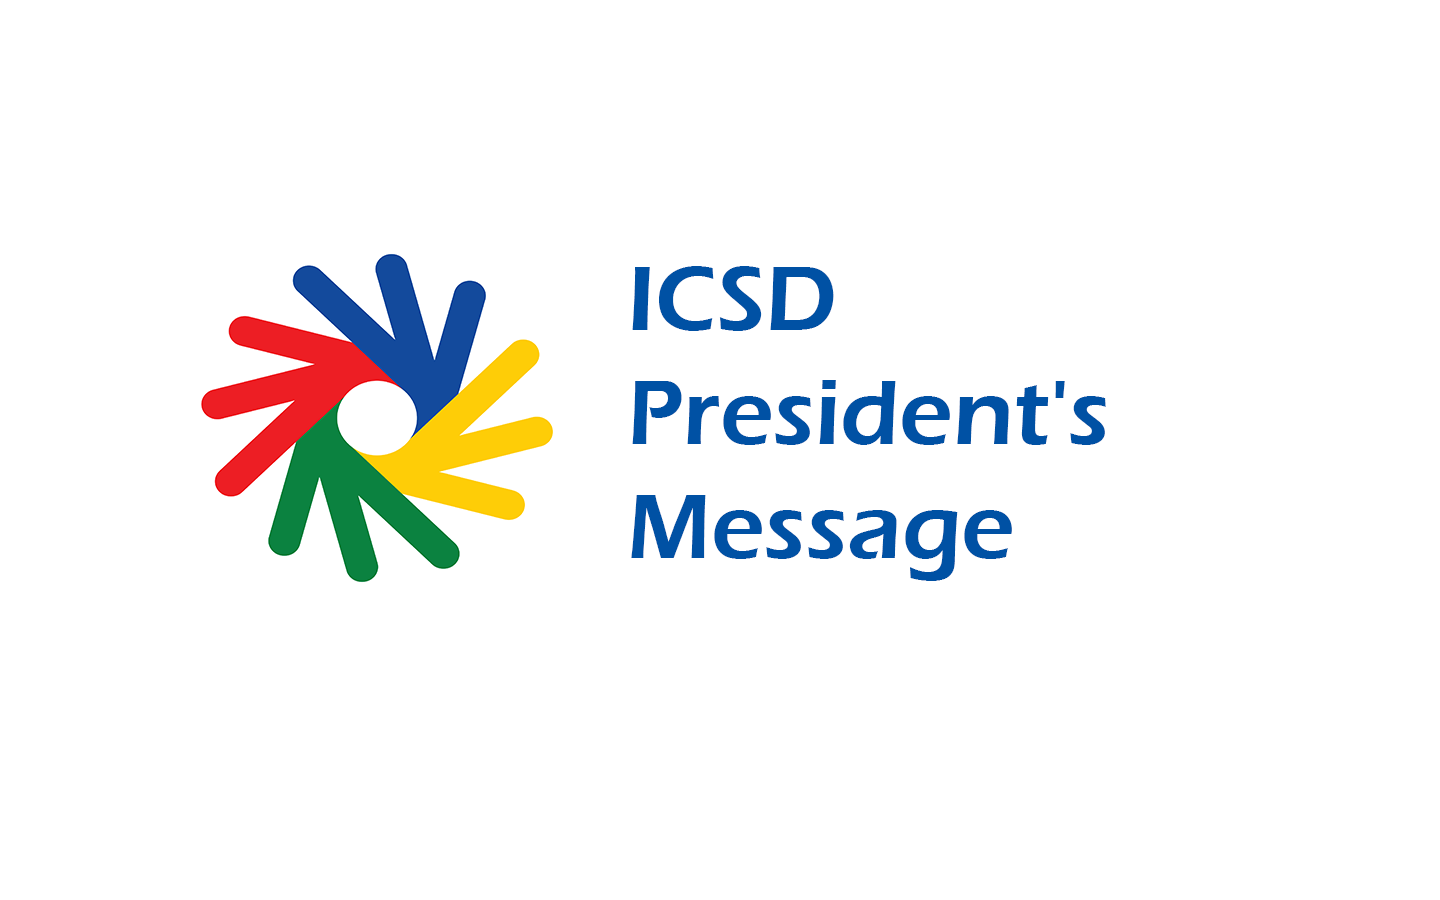 2019 Happy New Year Wishes and Greetings from the President of ICSD